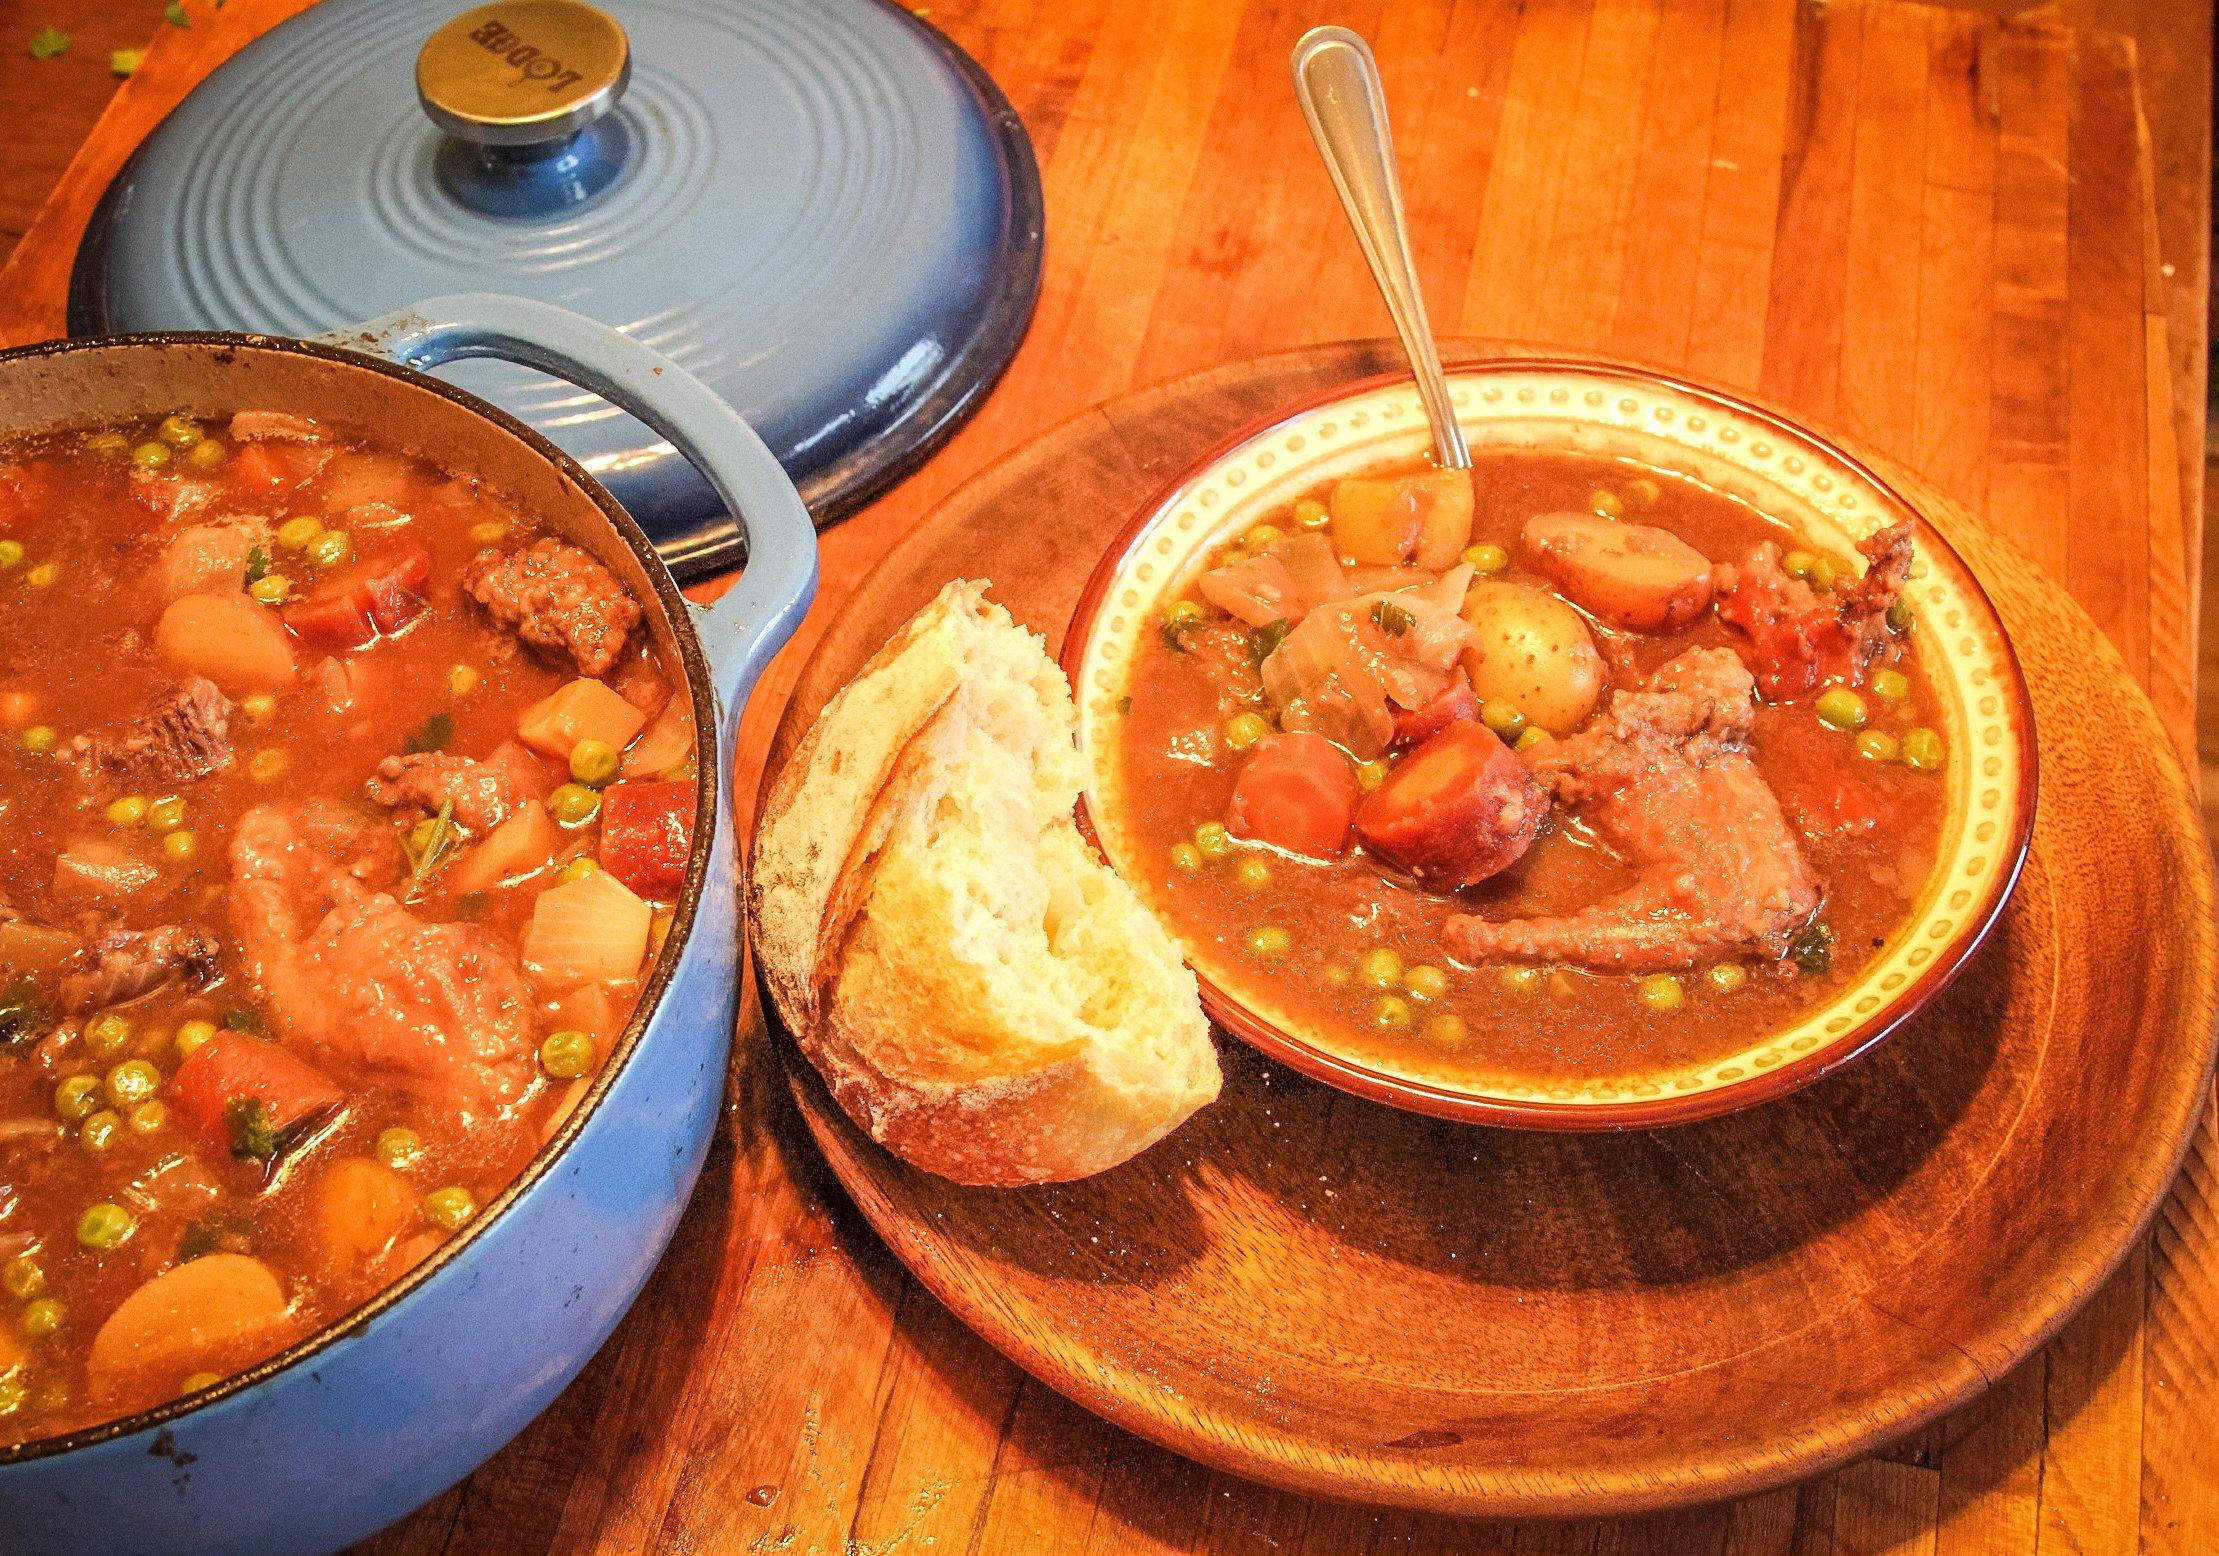 Serve the stew with a piece of crusty freshly baked bread.